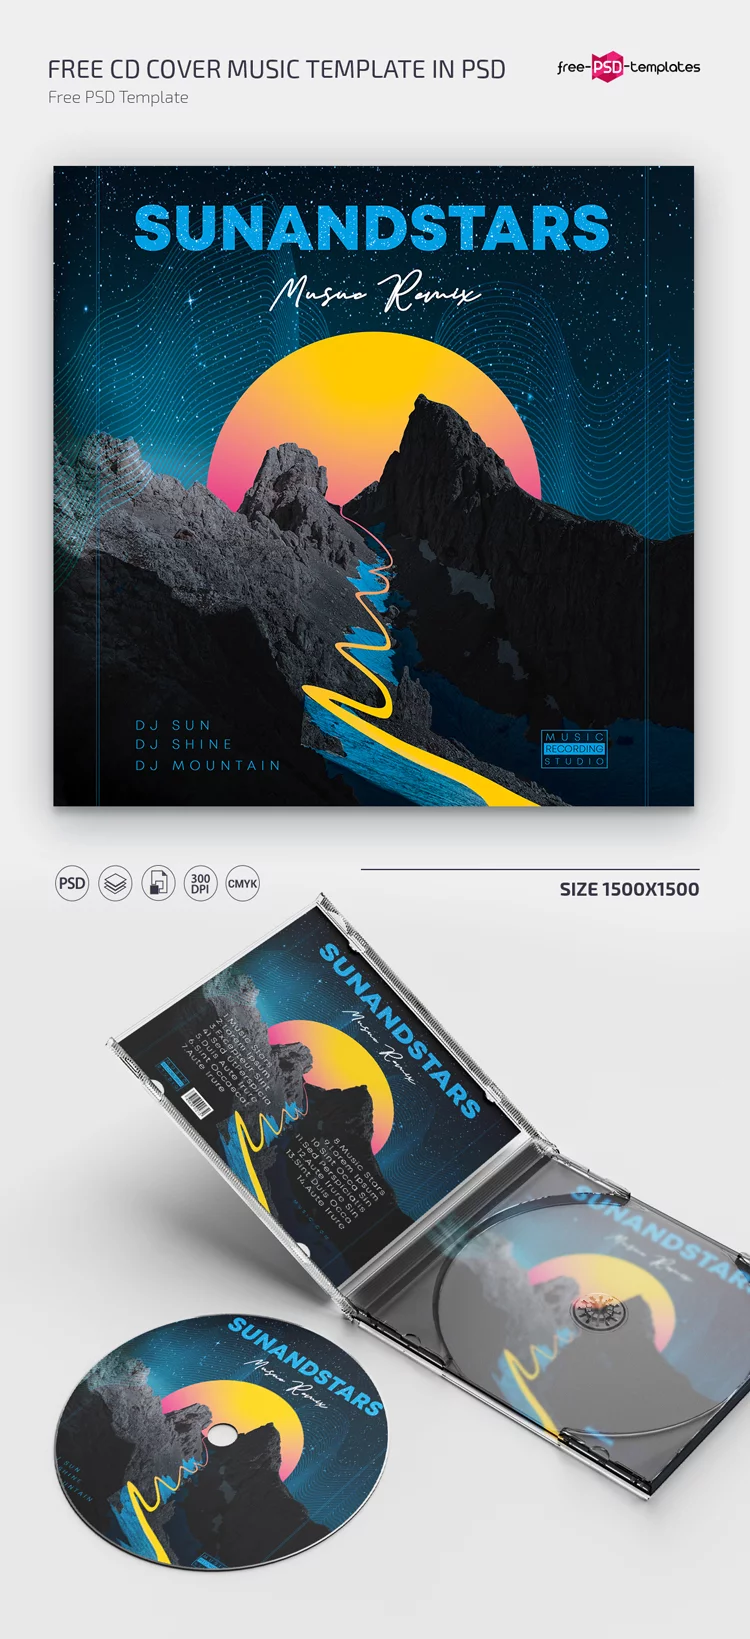 Free CD Cover Music Template in PSD